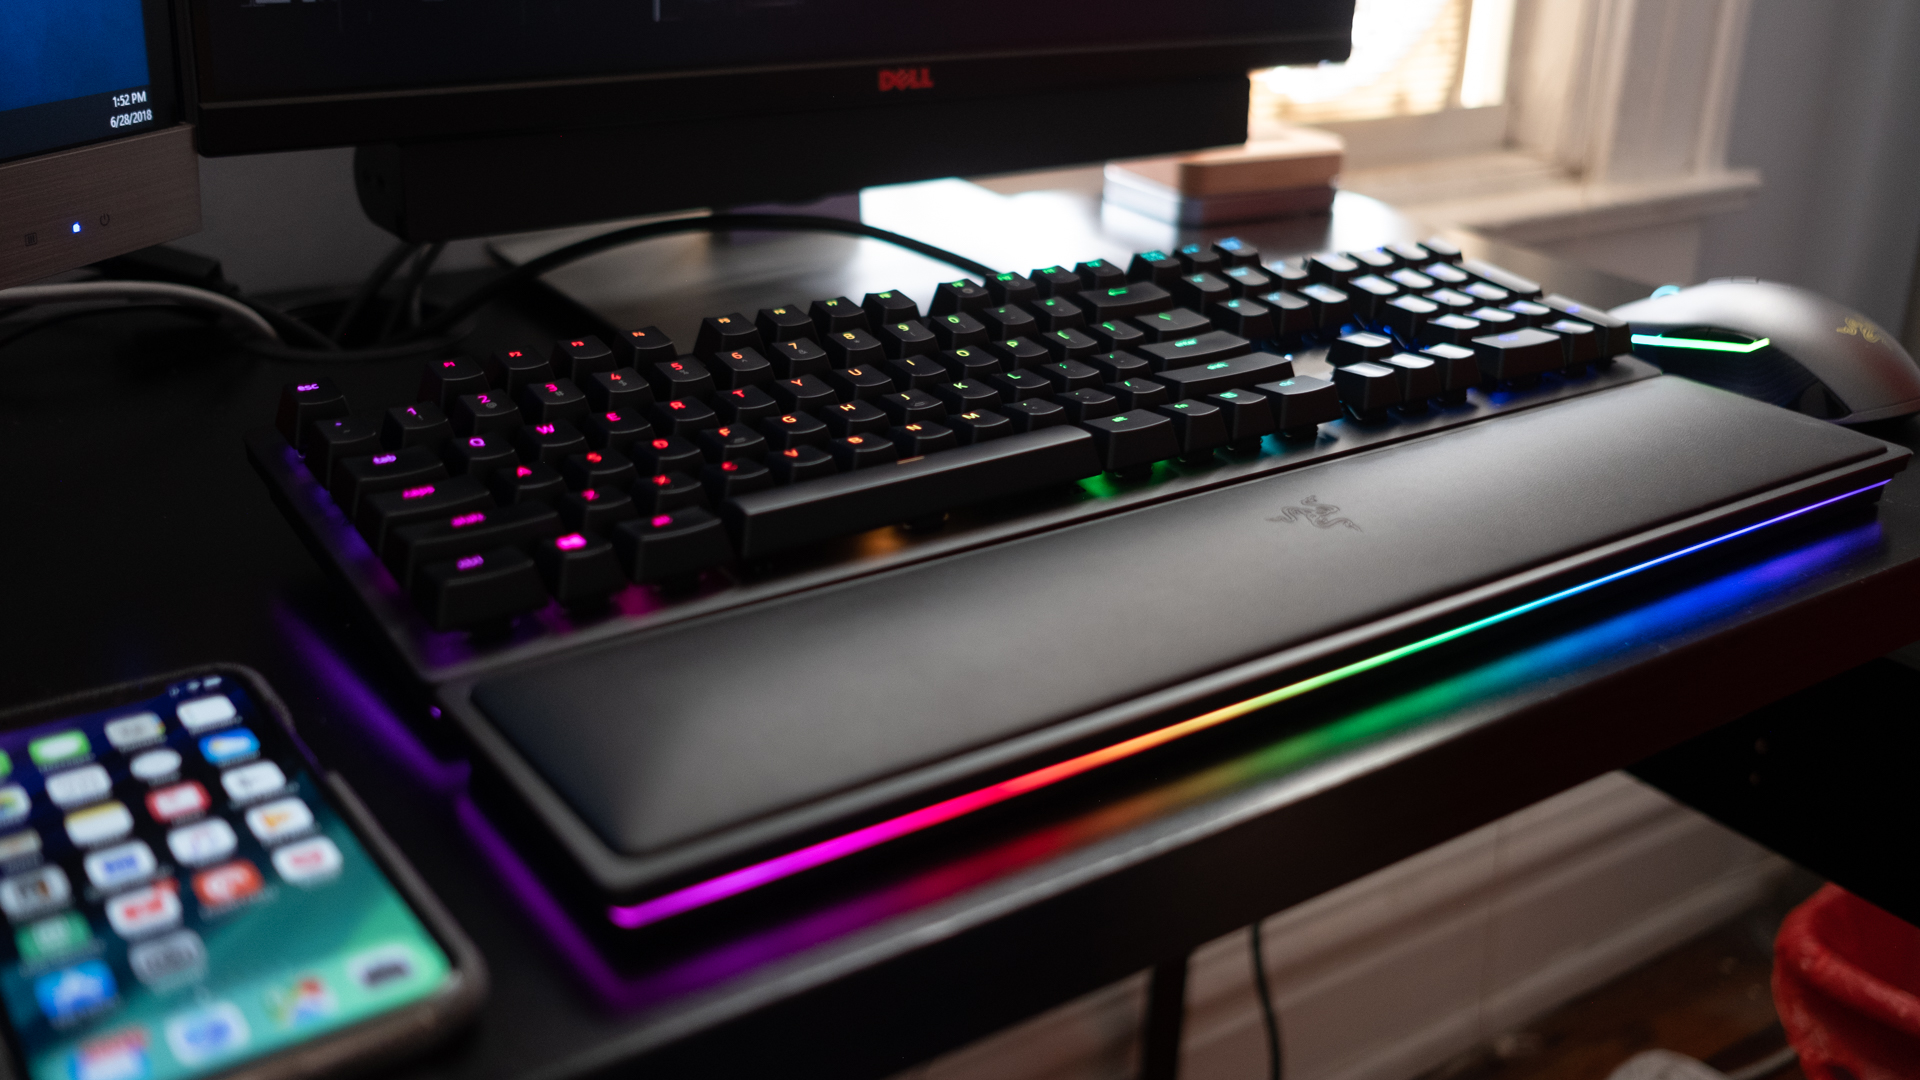 Simple Best Razer Keyboard Gaming with Epic Design ideas